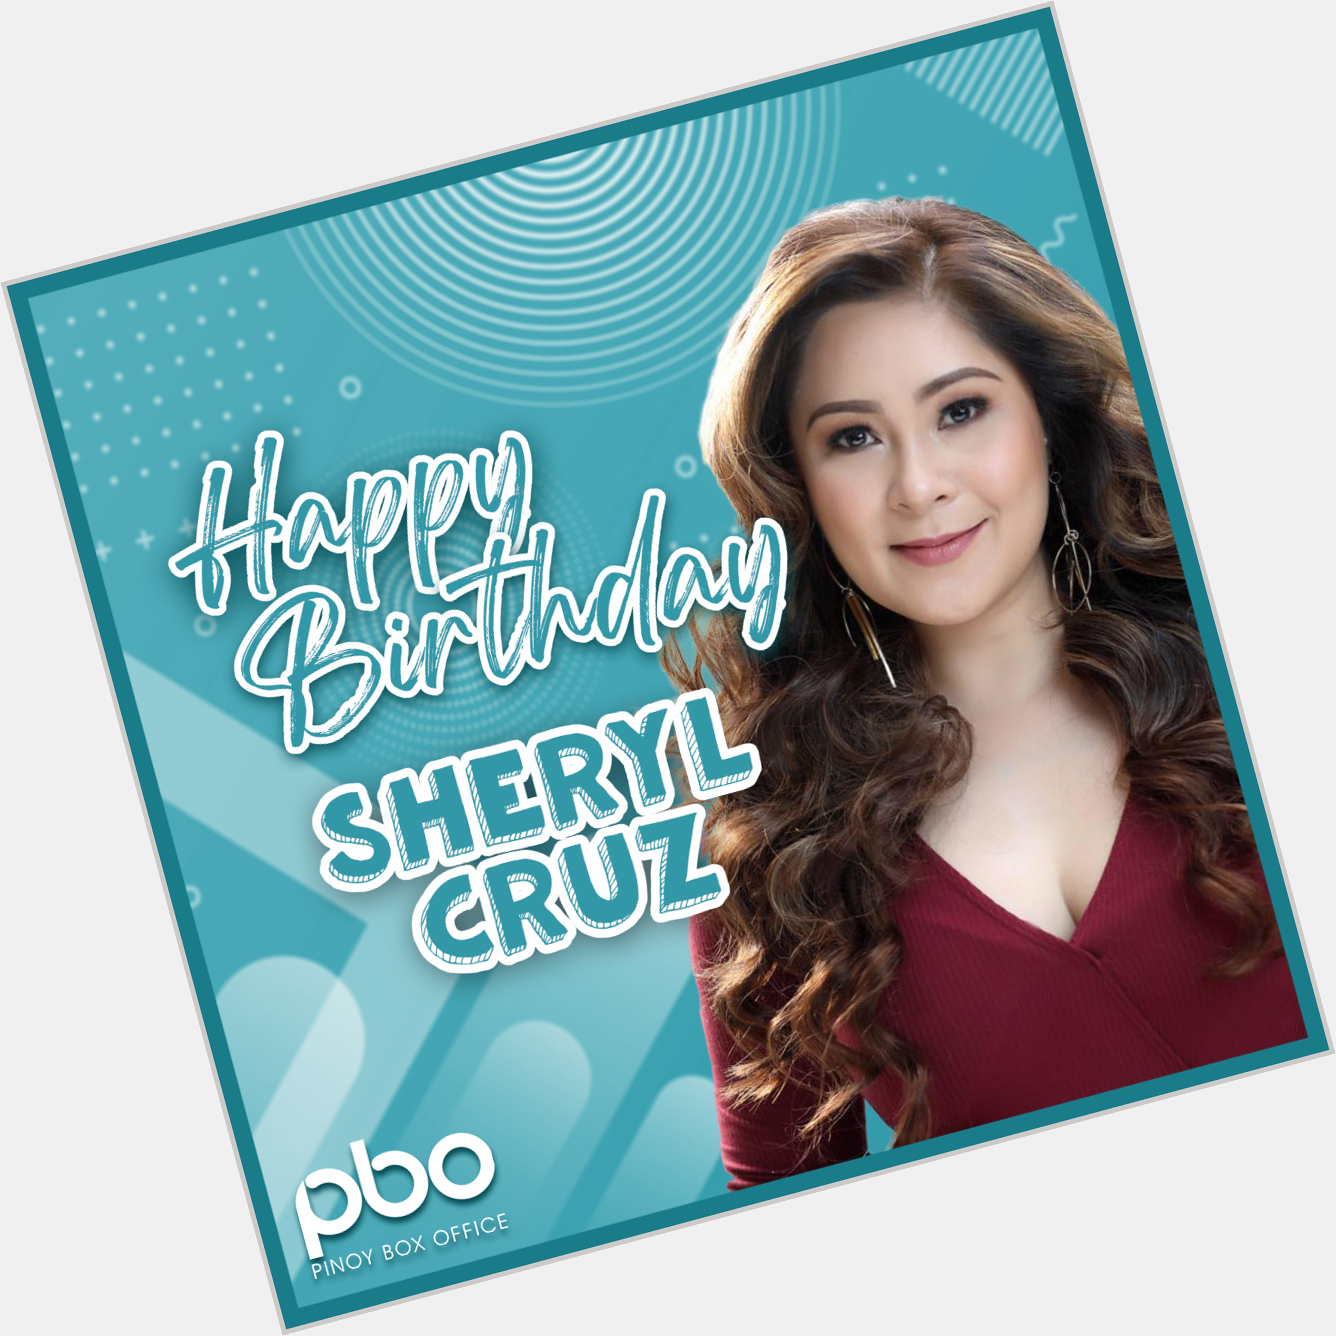 Happy birthday, Sheryl Cruz! May your special day be filled with love and pleasant surprises! 